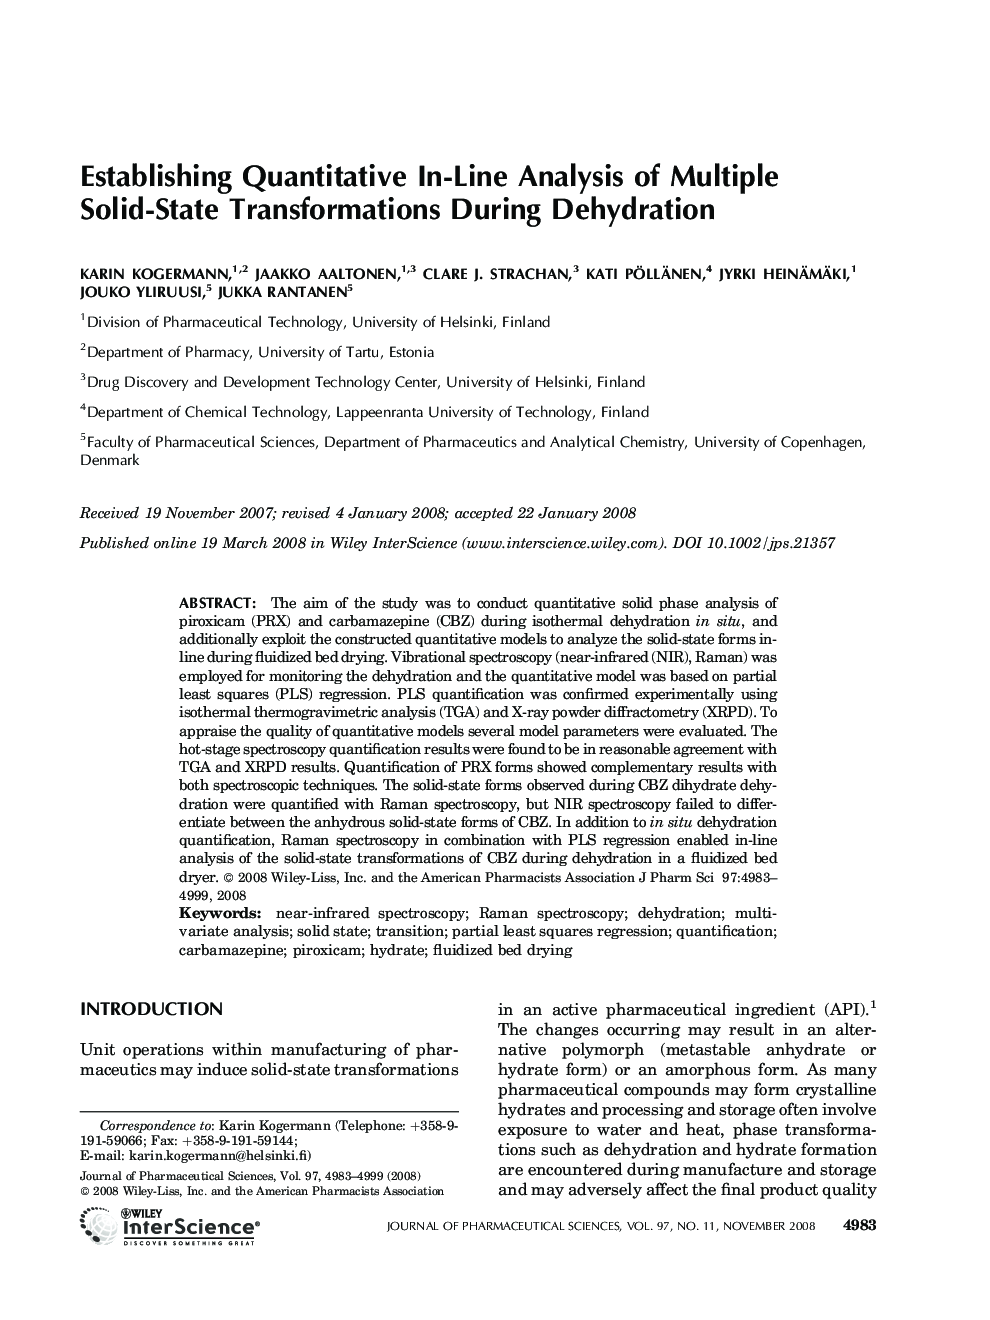 Establishing quantitative in-line analysis of multiple solid-state transformations during dehydration